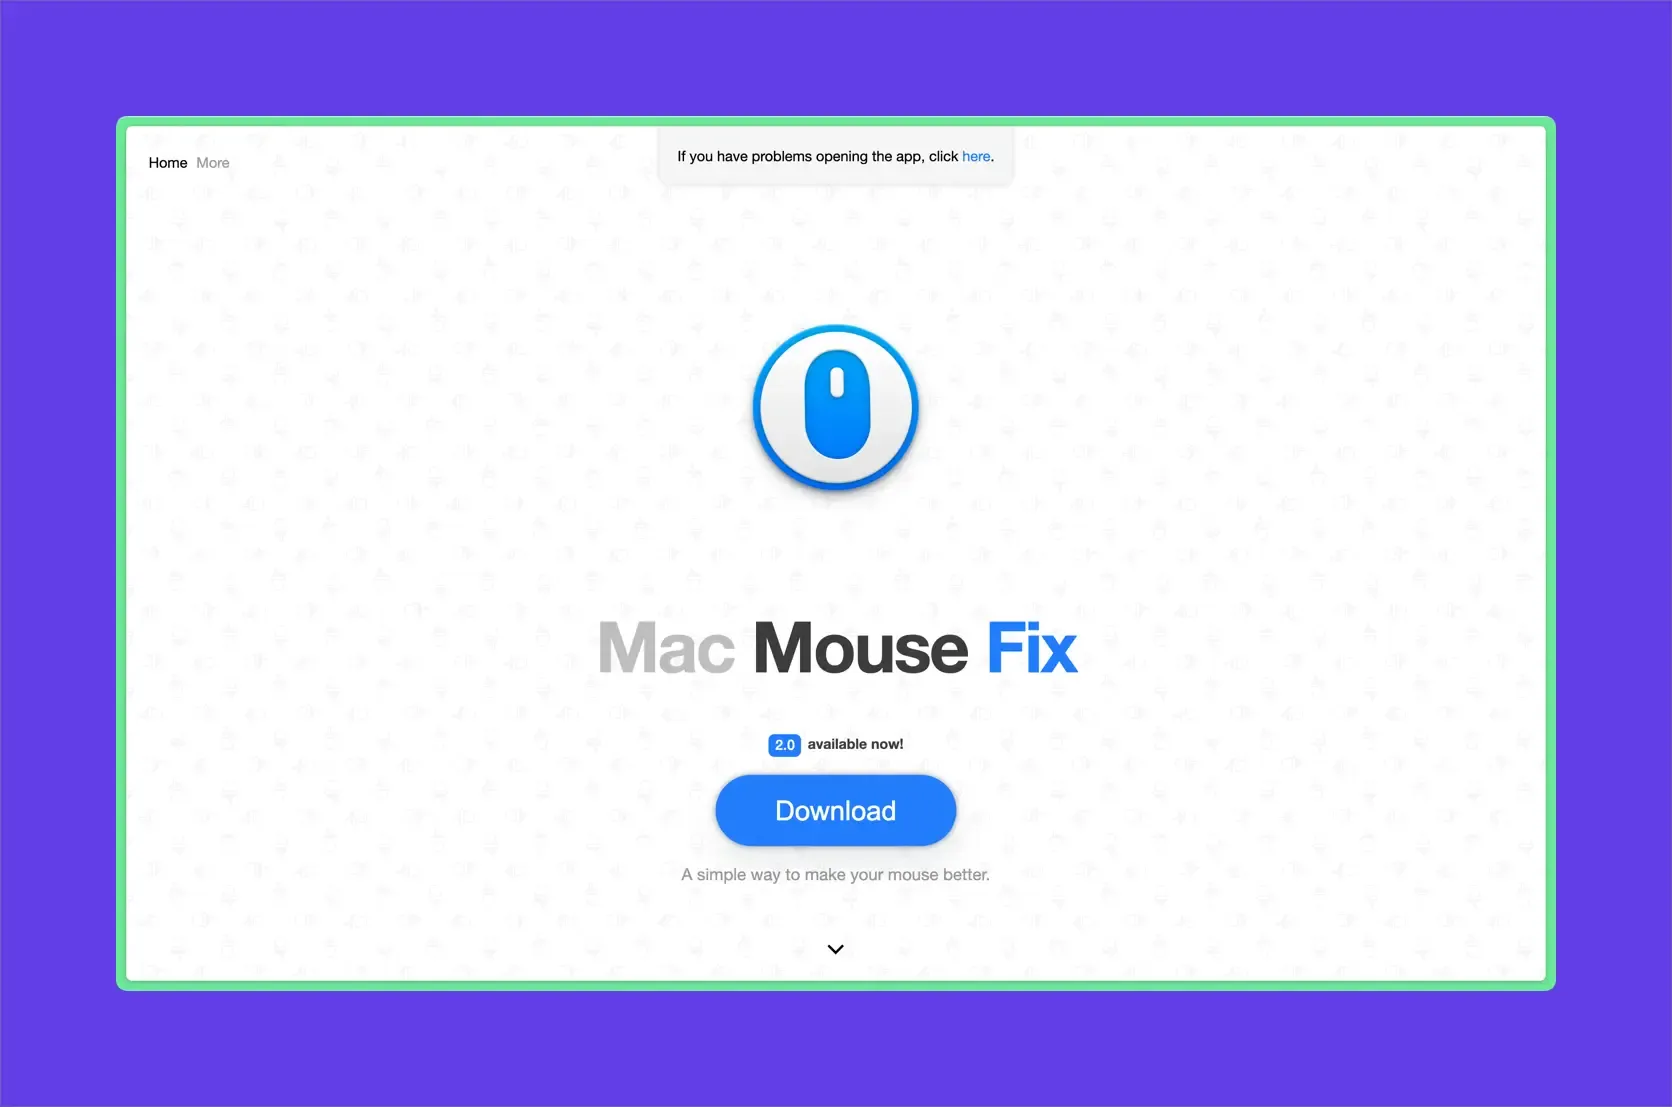 MacMouseFix - Use Your Mouse Better